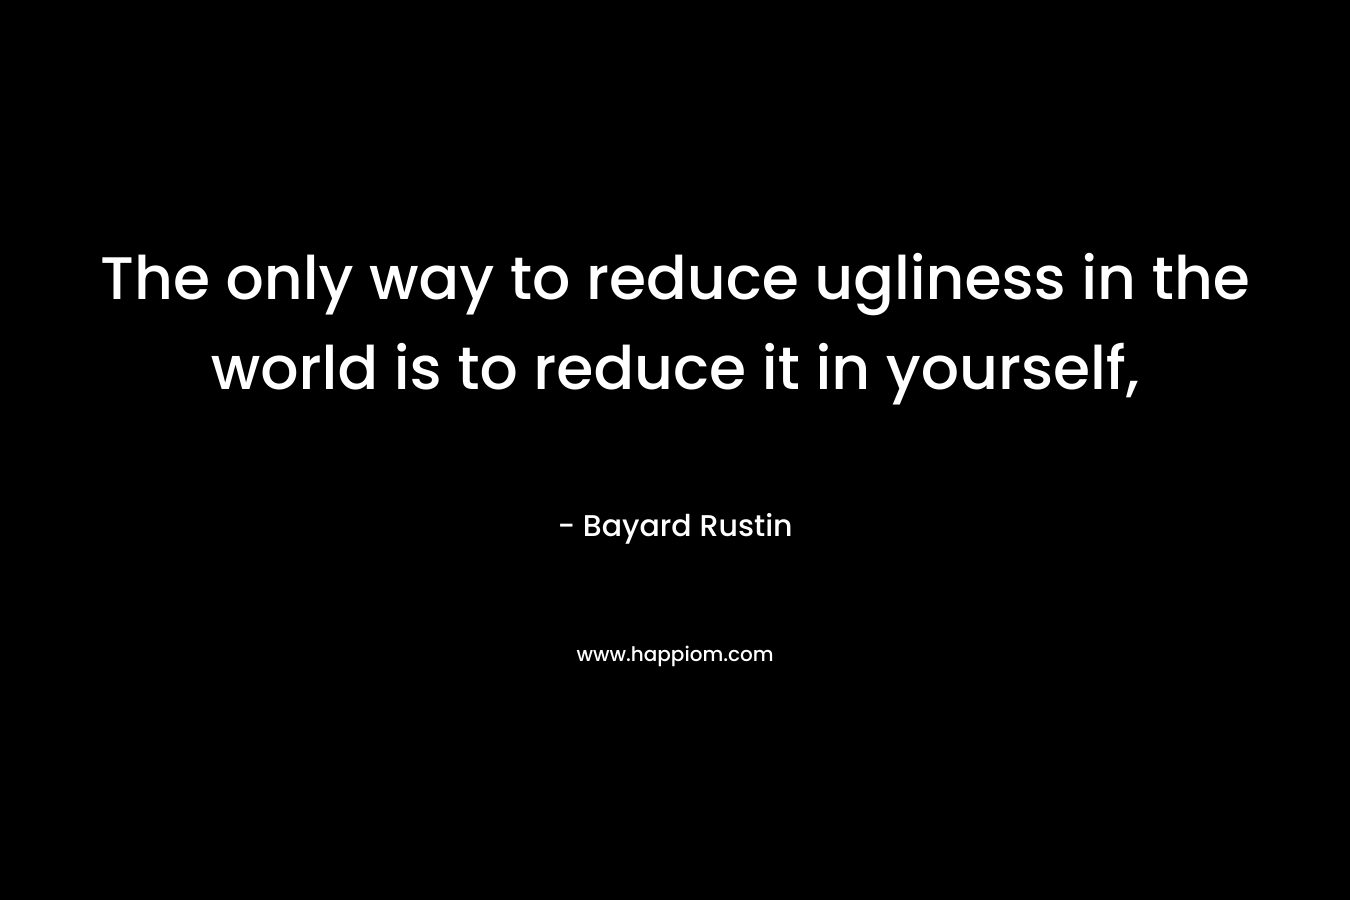 The only way to reduce ugliness in the world is to reduce it in yourself,